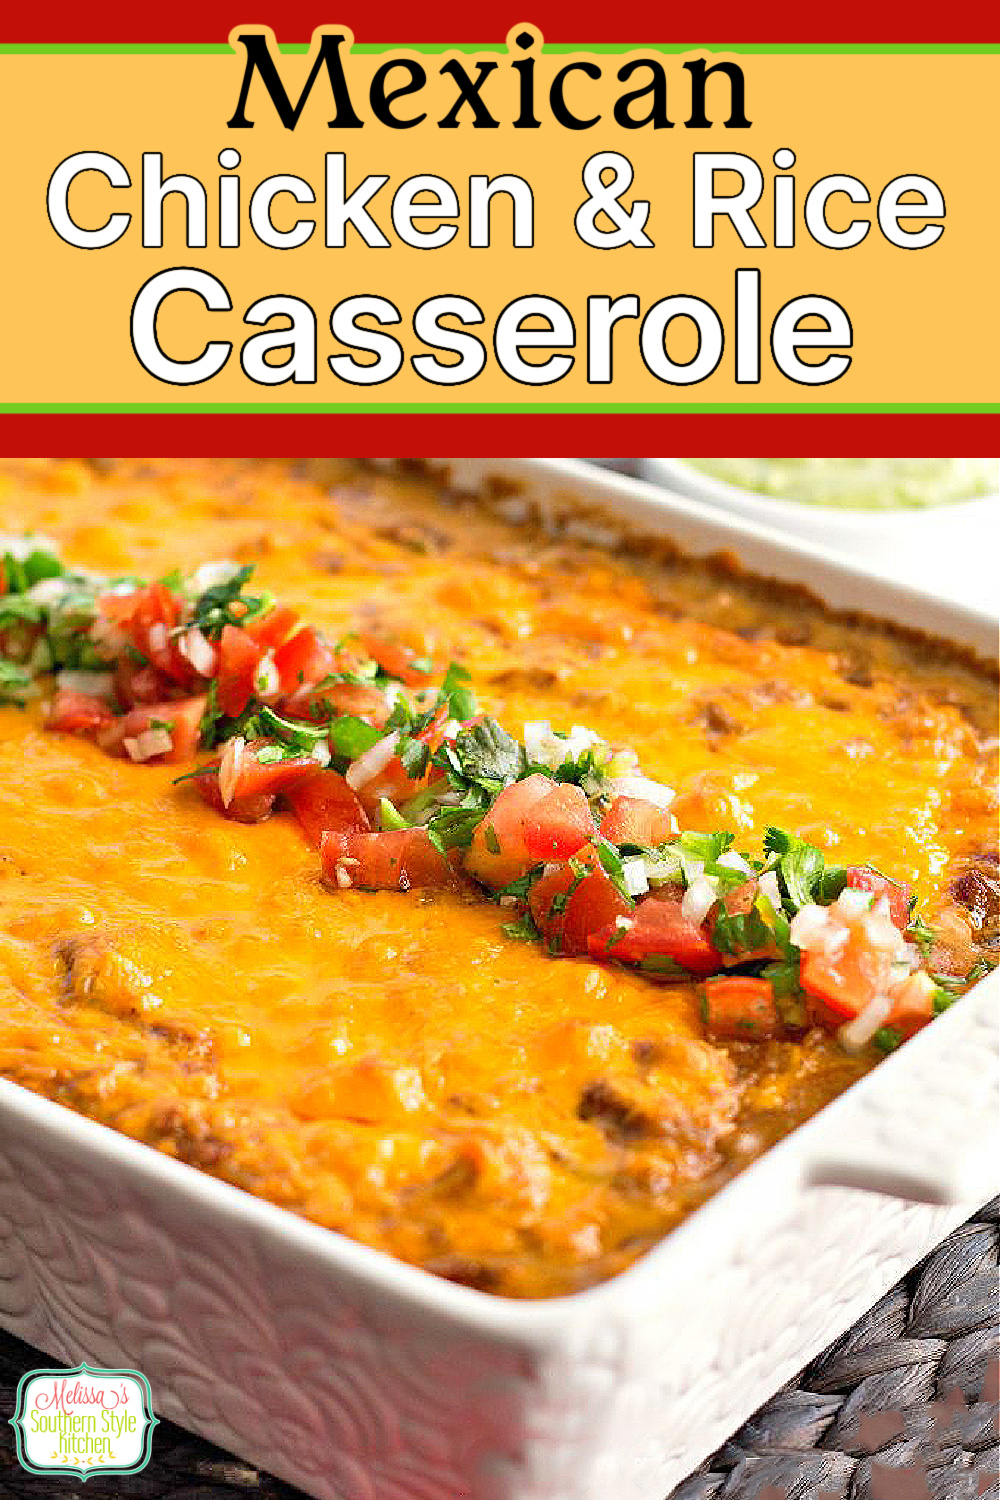 Mexican Salsa Chicken and Rice Casserole for a one dish homestyle fiesta #chickenandrice #chickencasseroles #mexicanchicken #salsachicken #easychickenrecipes #casseroles #southernfood #southernrecipes #dinnerideas via @melissasssk